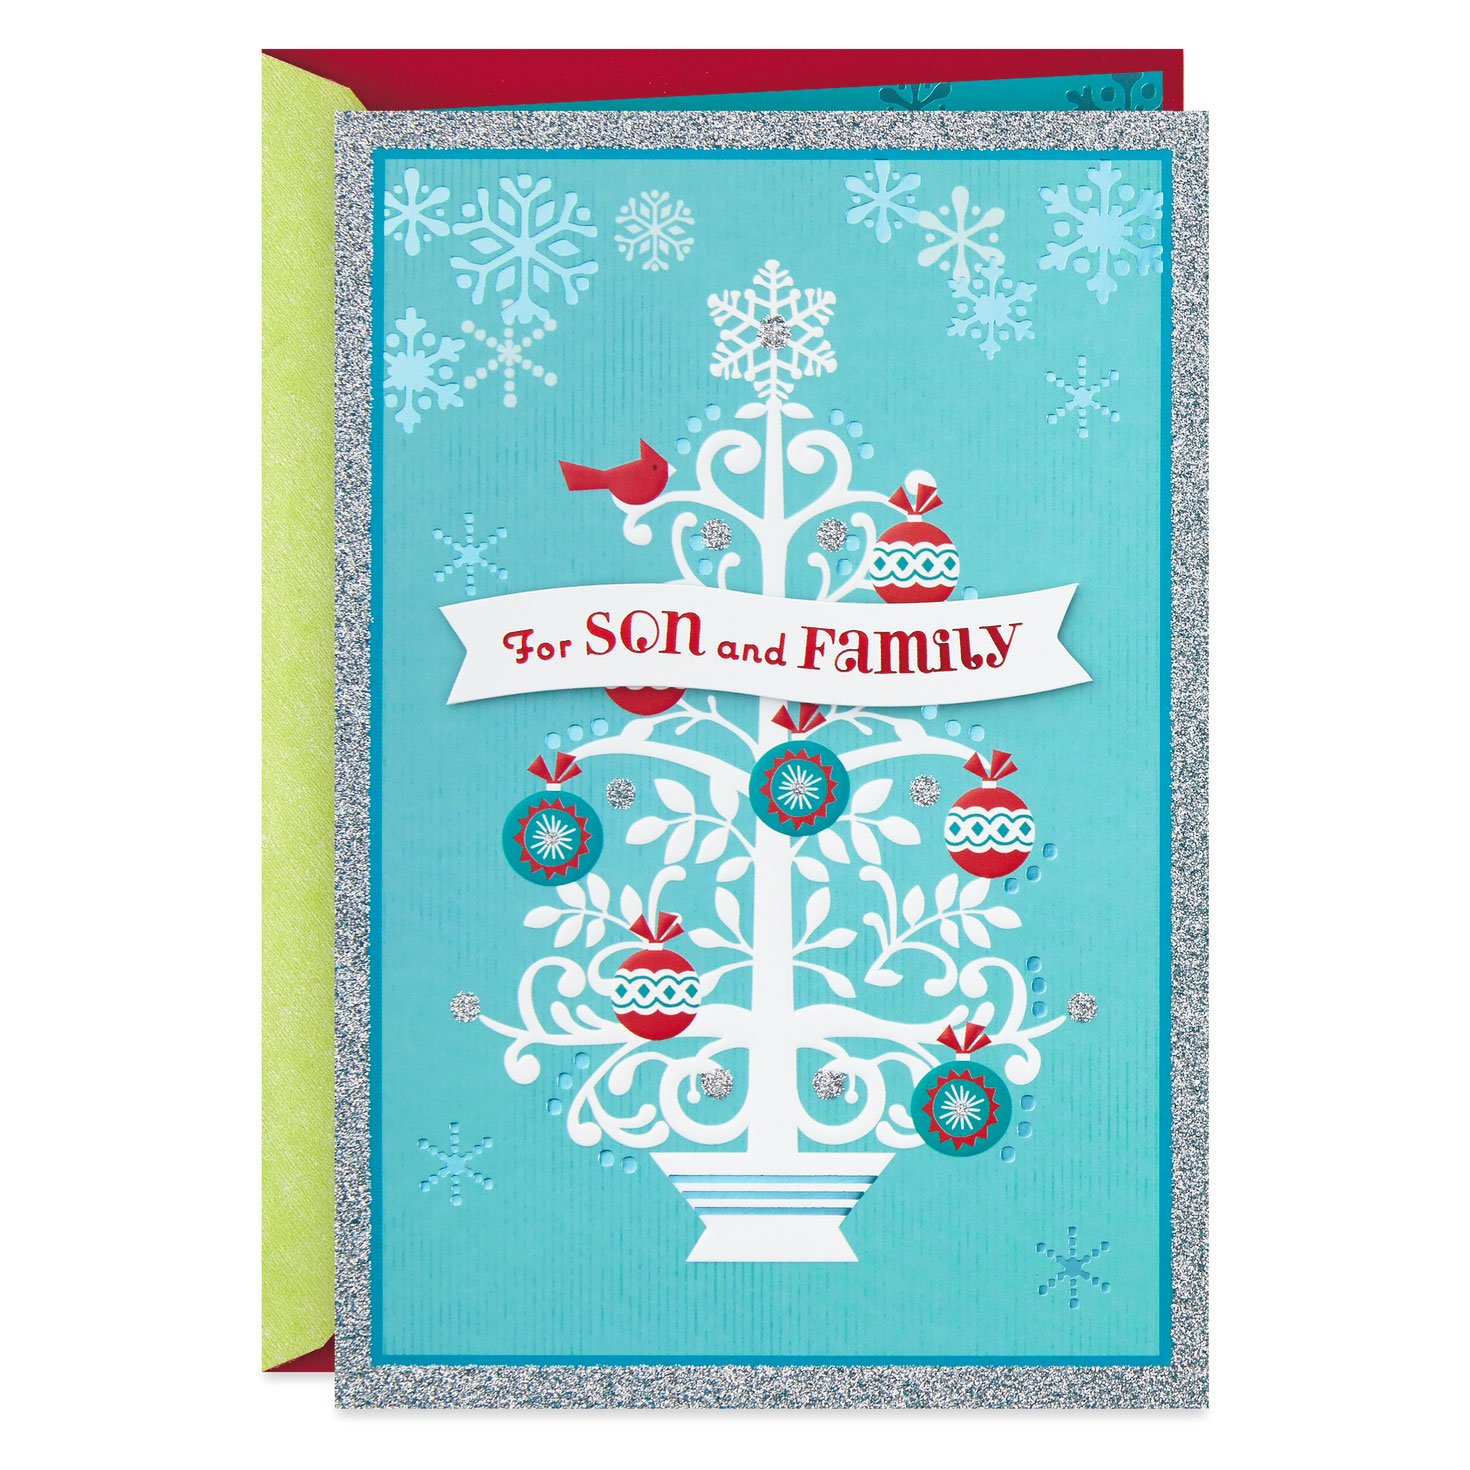 Love You So Much Christmas Card for Son and Family - Greeting Cards - Hallmark